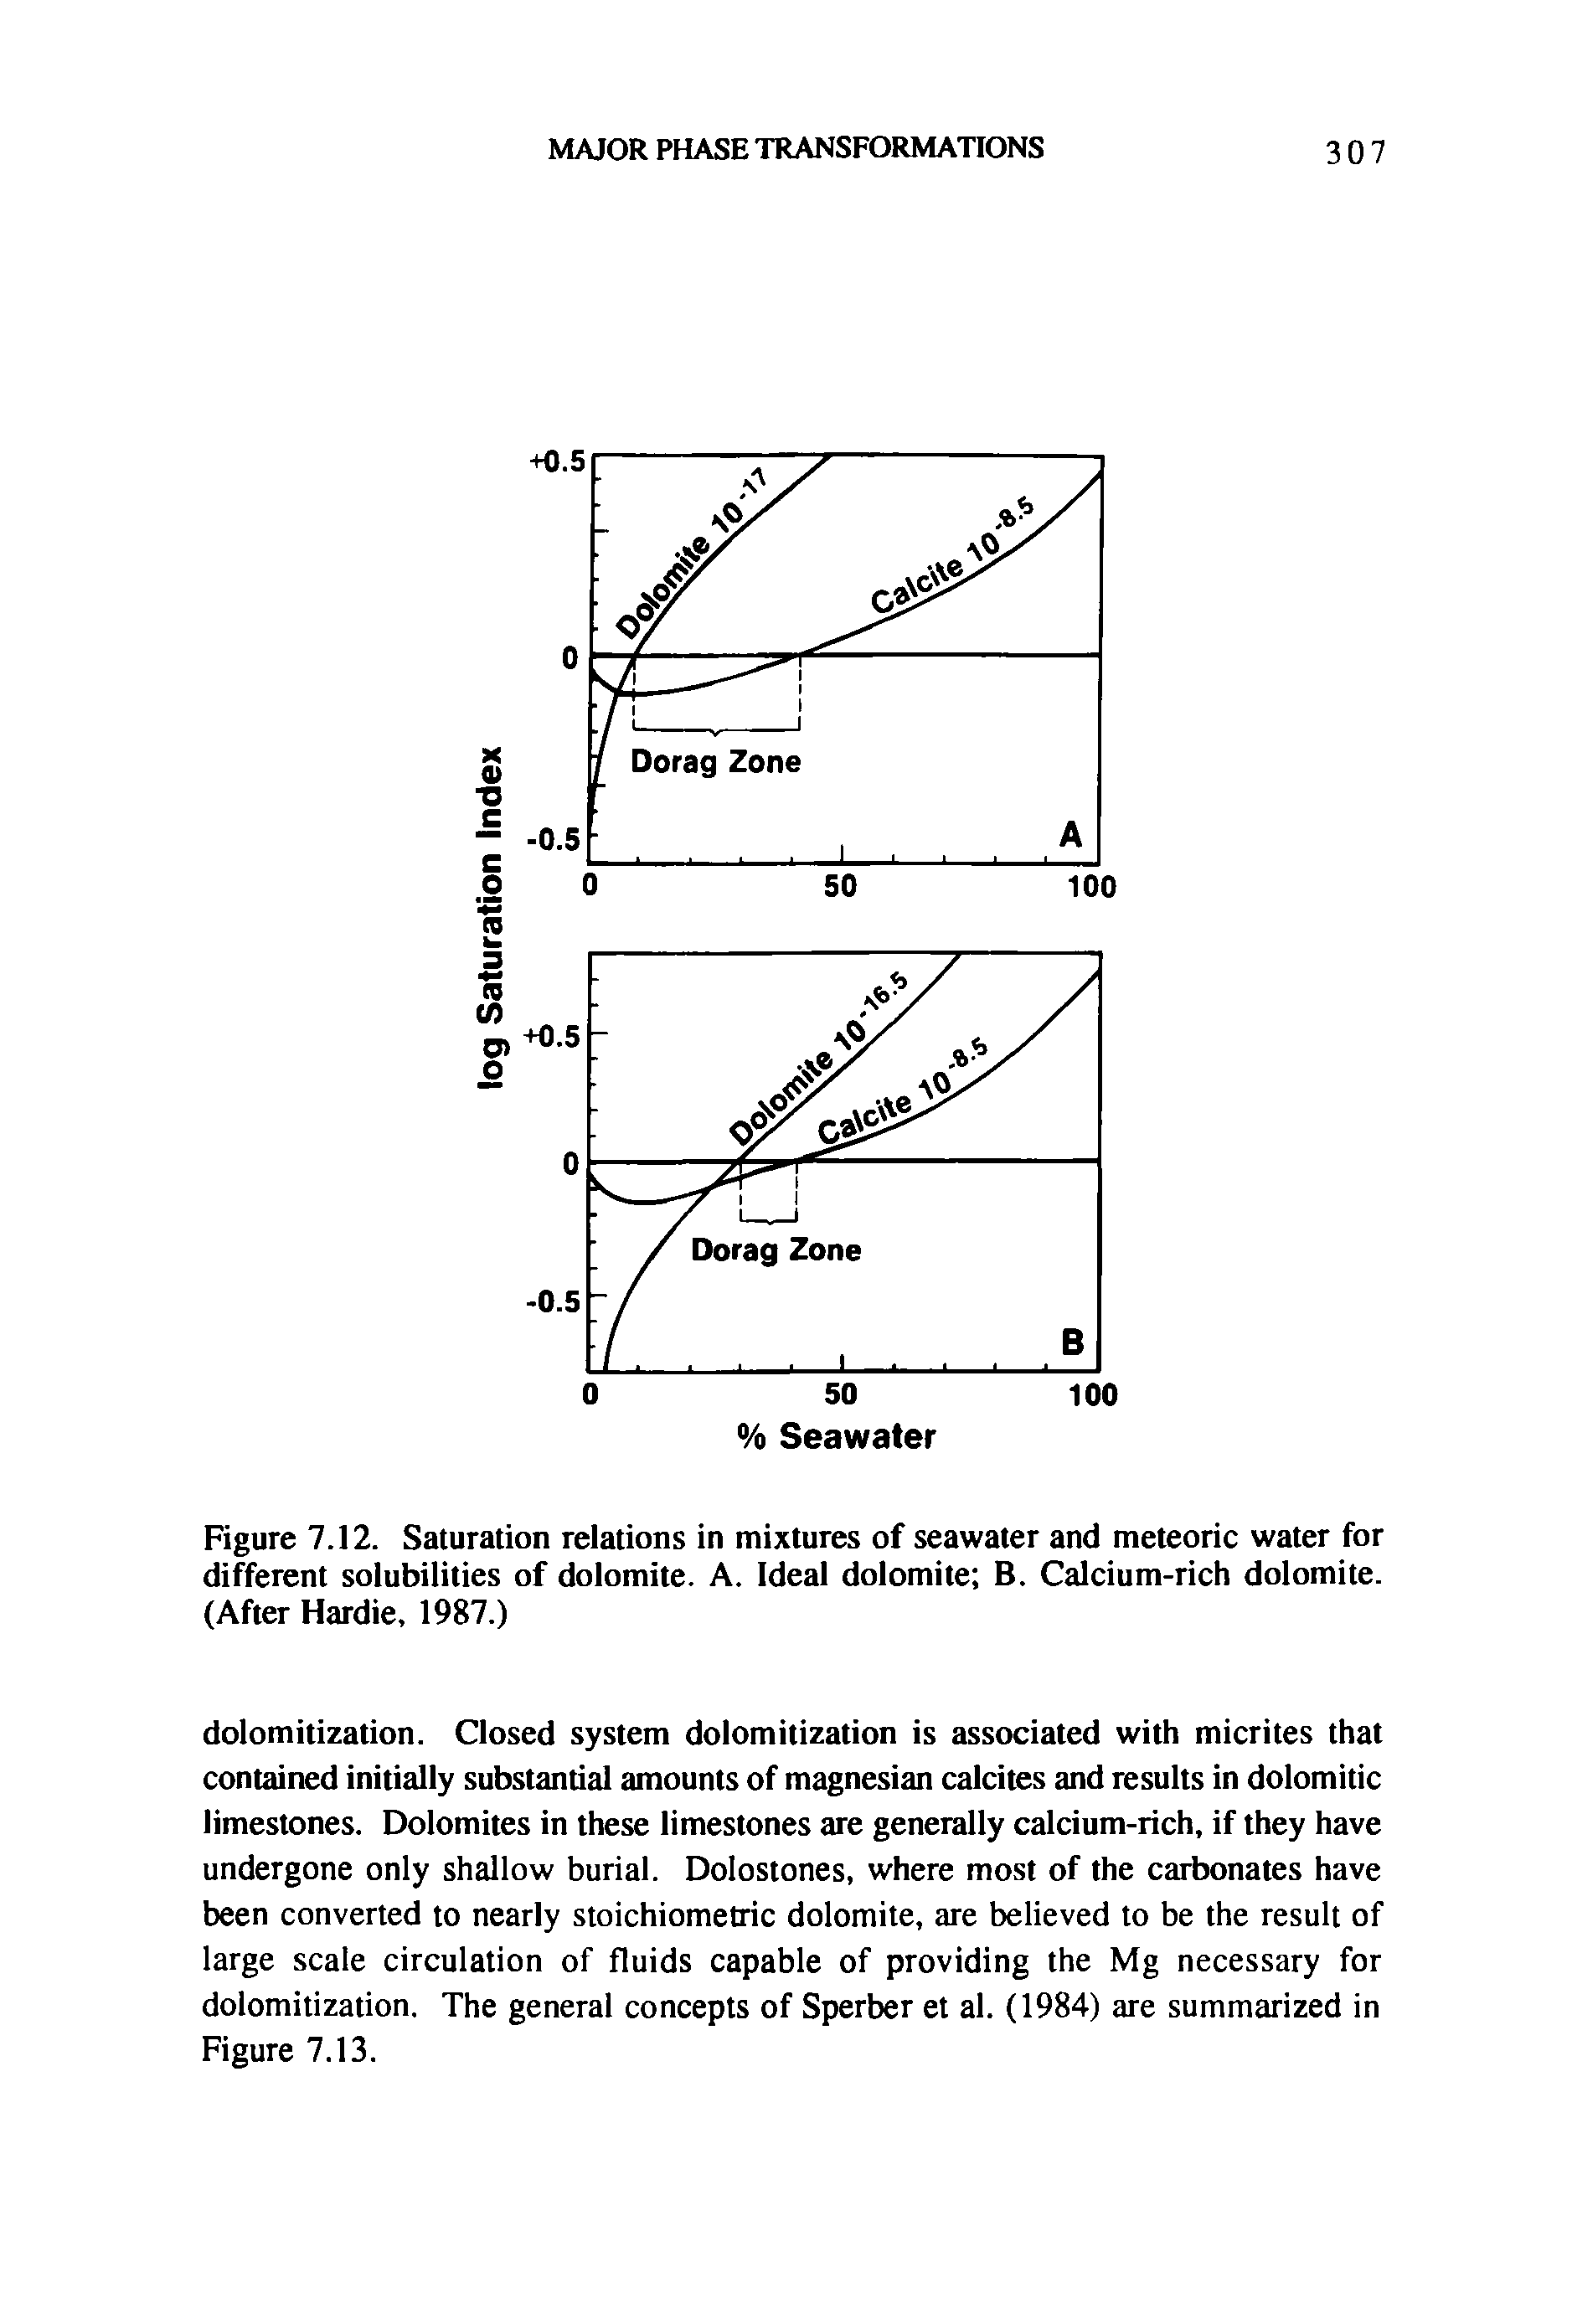 Figure 7.12. Saturation relations in mixtures of seawater and meteoric water for different solubilities of dolomite. A. Ideal dolomite B. Calcium-rich dolomite. (After Hardie, 1987.)...